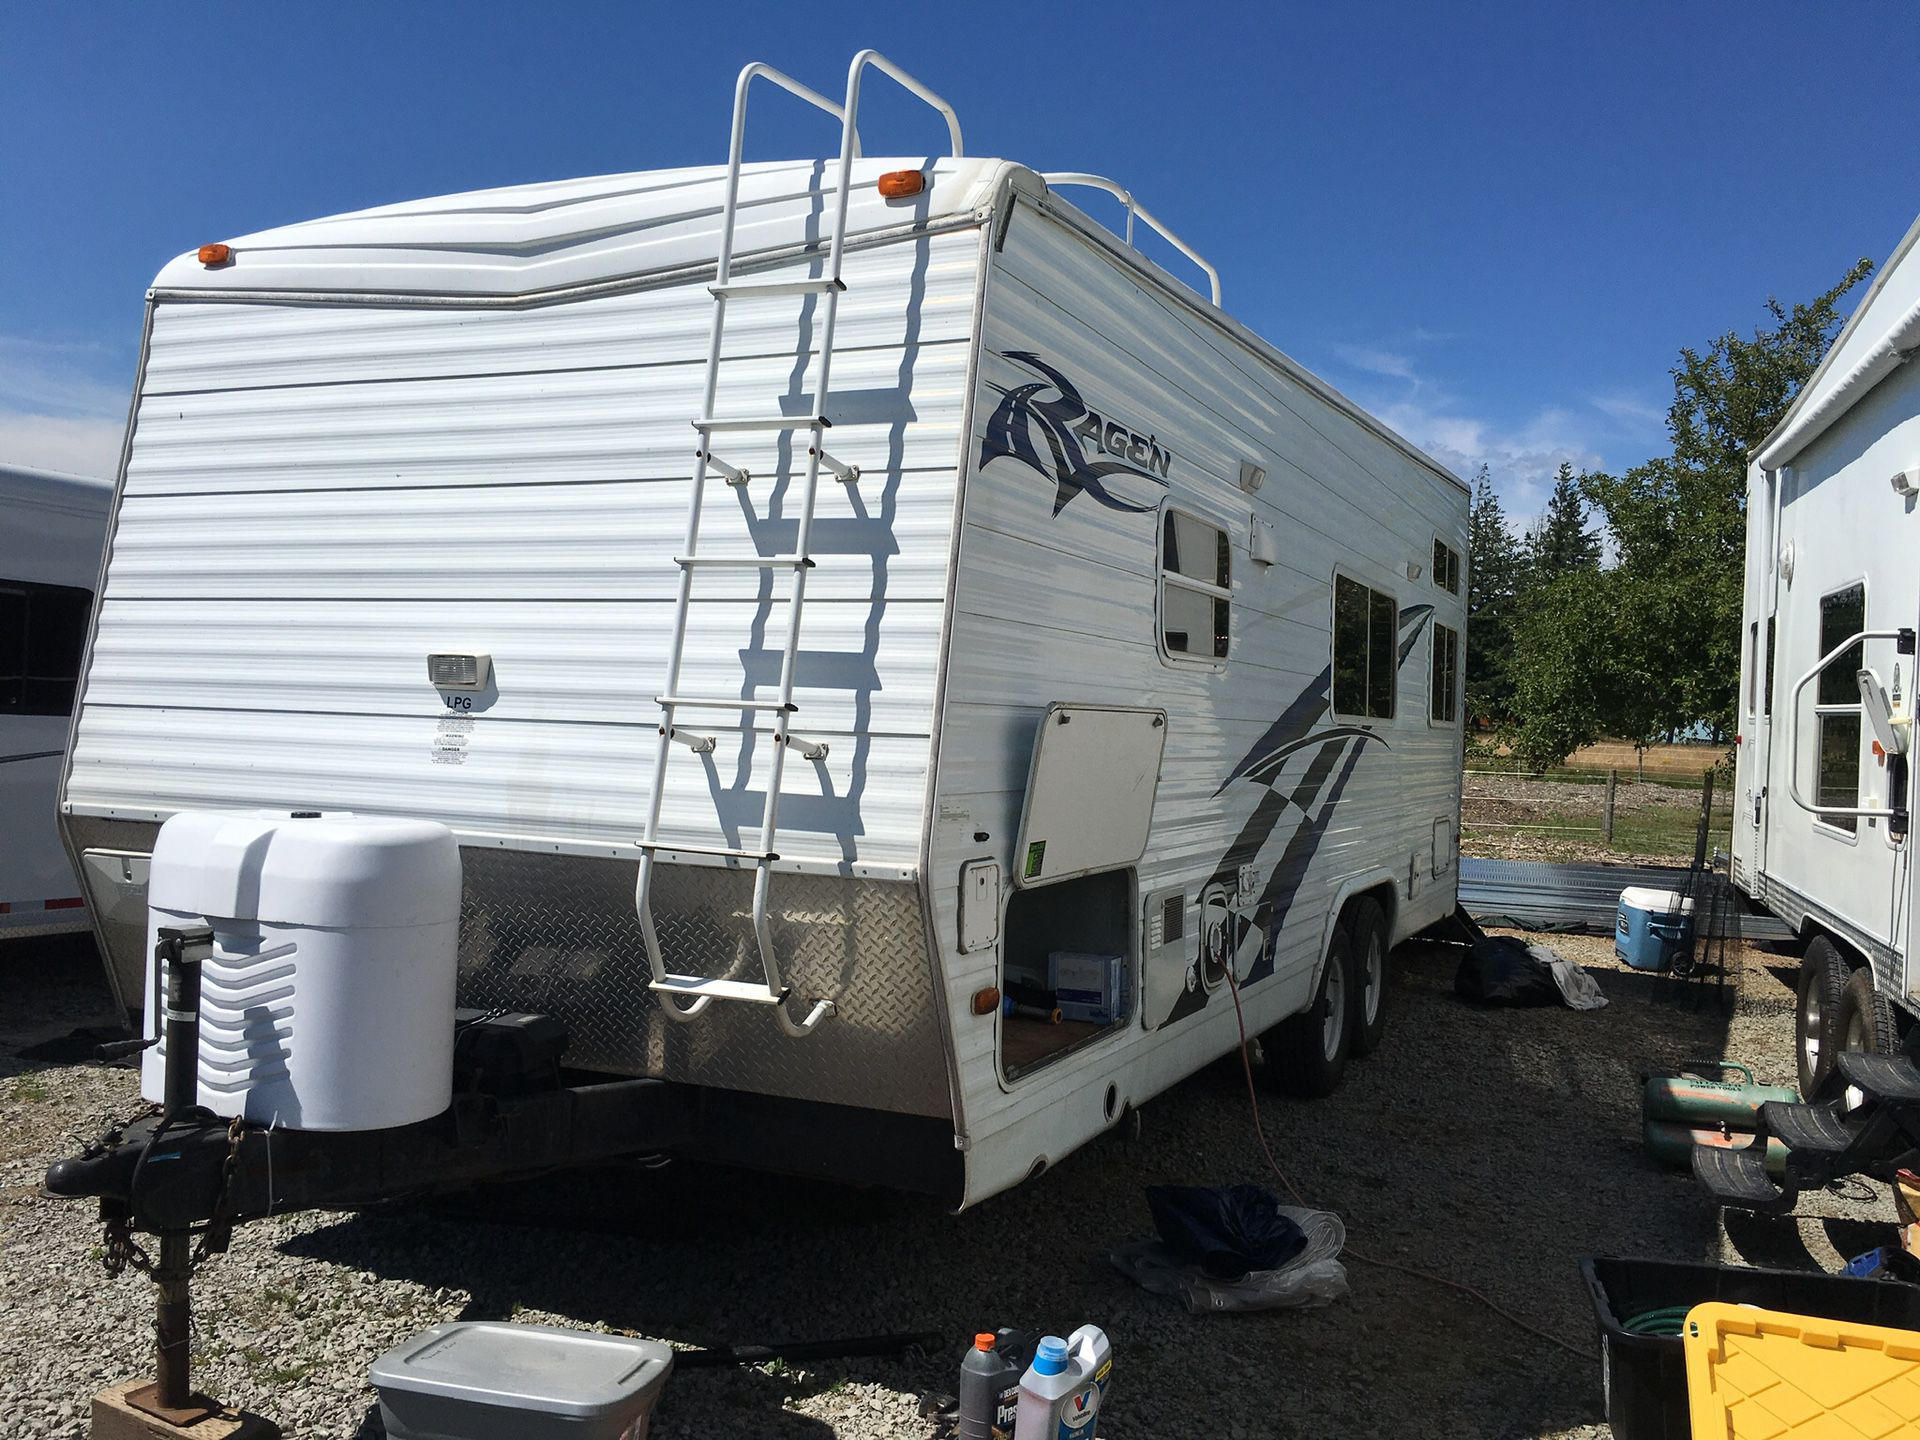 2006 Rage’n toy hauler m-25’ excellent condition 2nd owner. This will hold up to four quads and two dirt bikes sleeps six smoke free